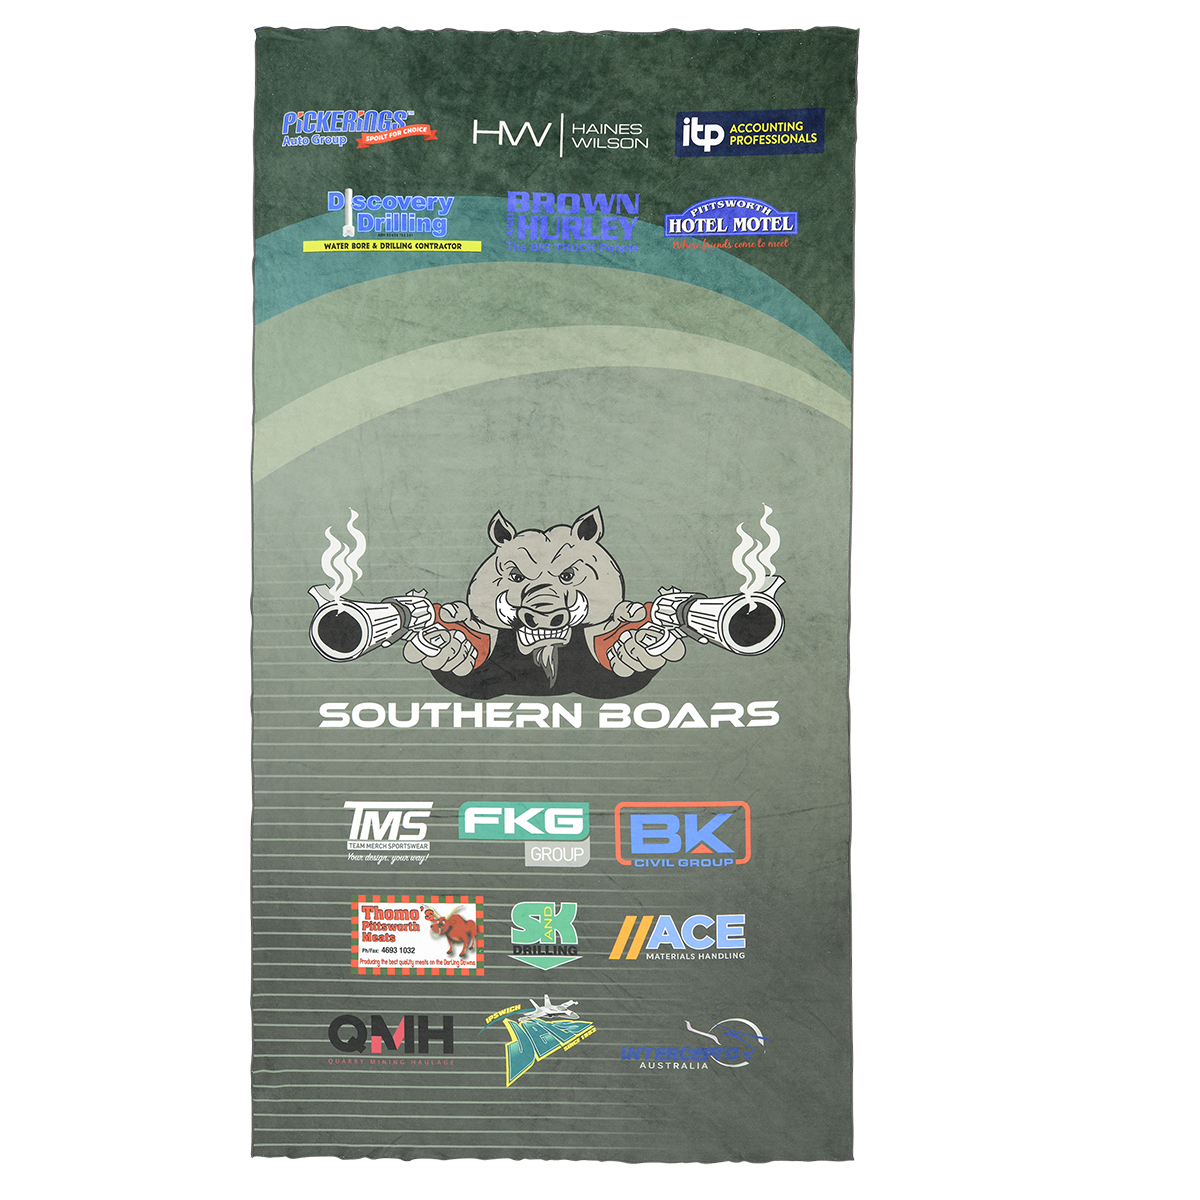 Sublimated Beach Towels